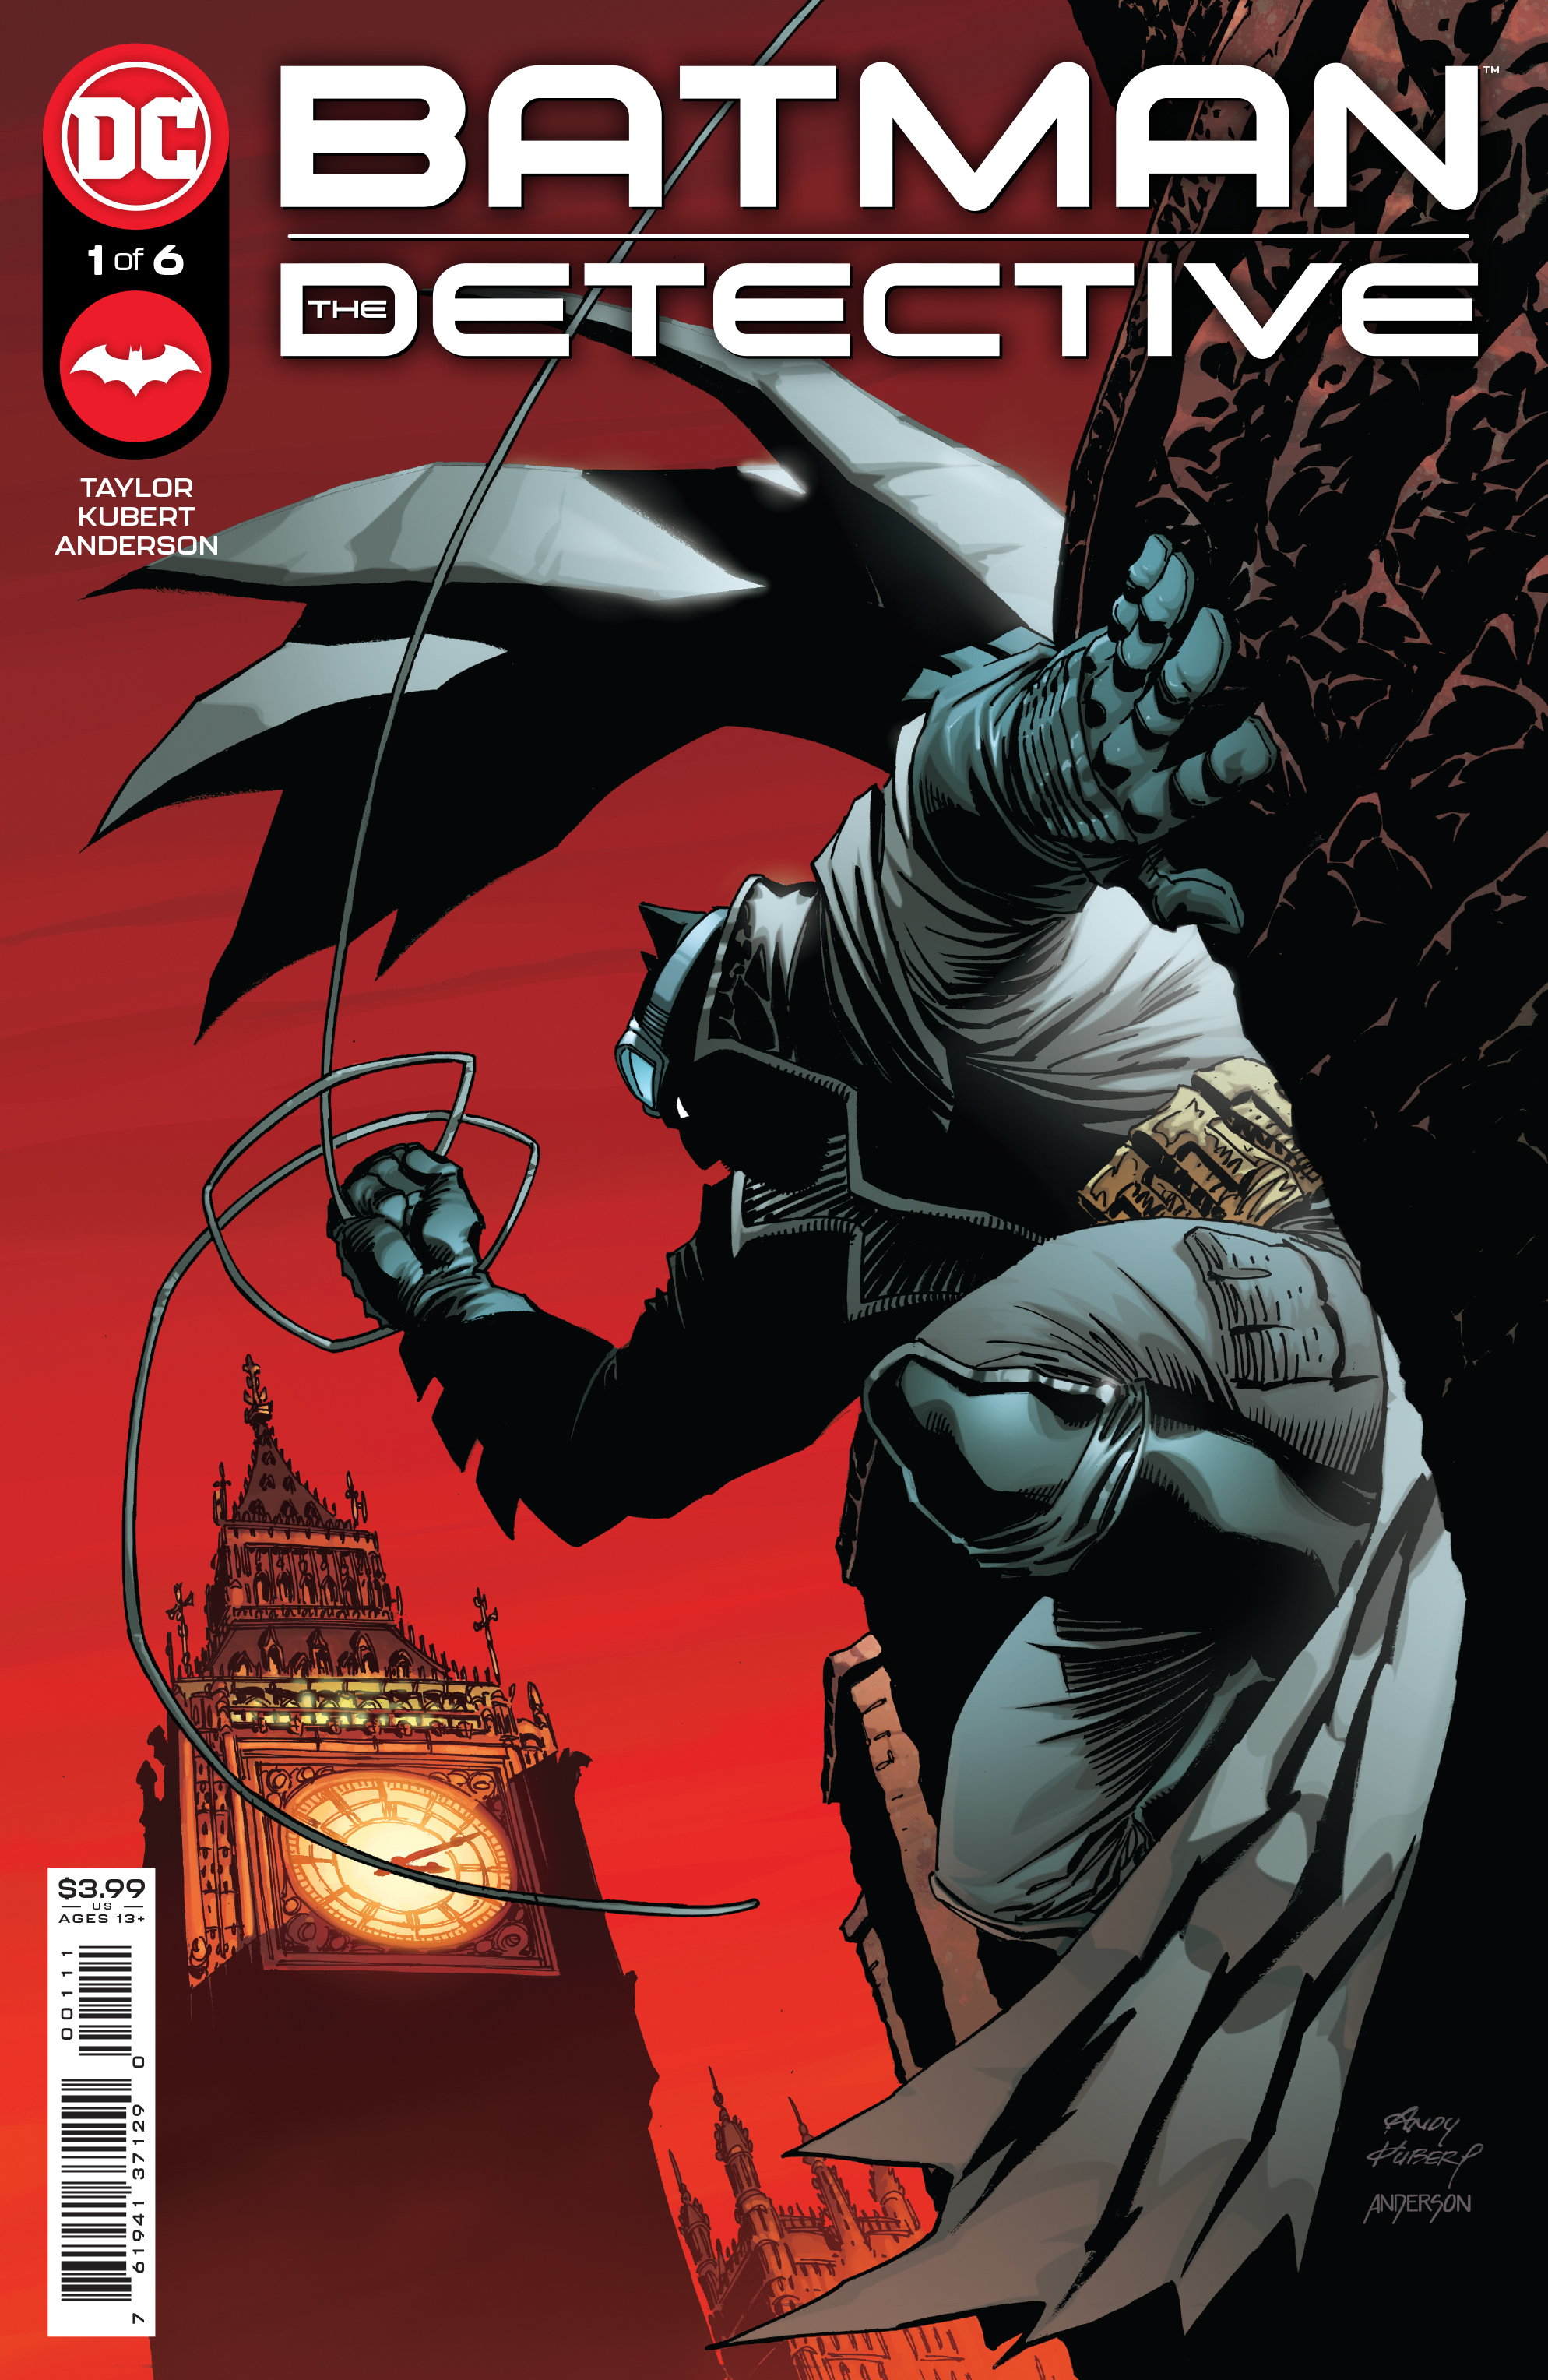 Batman the Detective #1 Cover A Andy Kubert (Of 6)